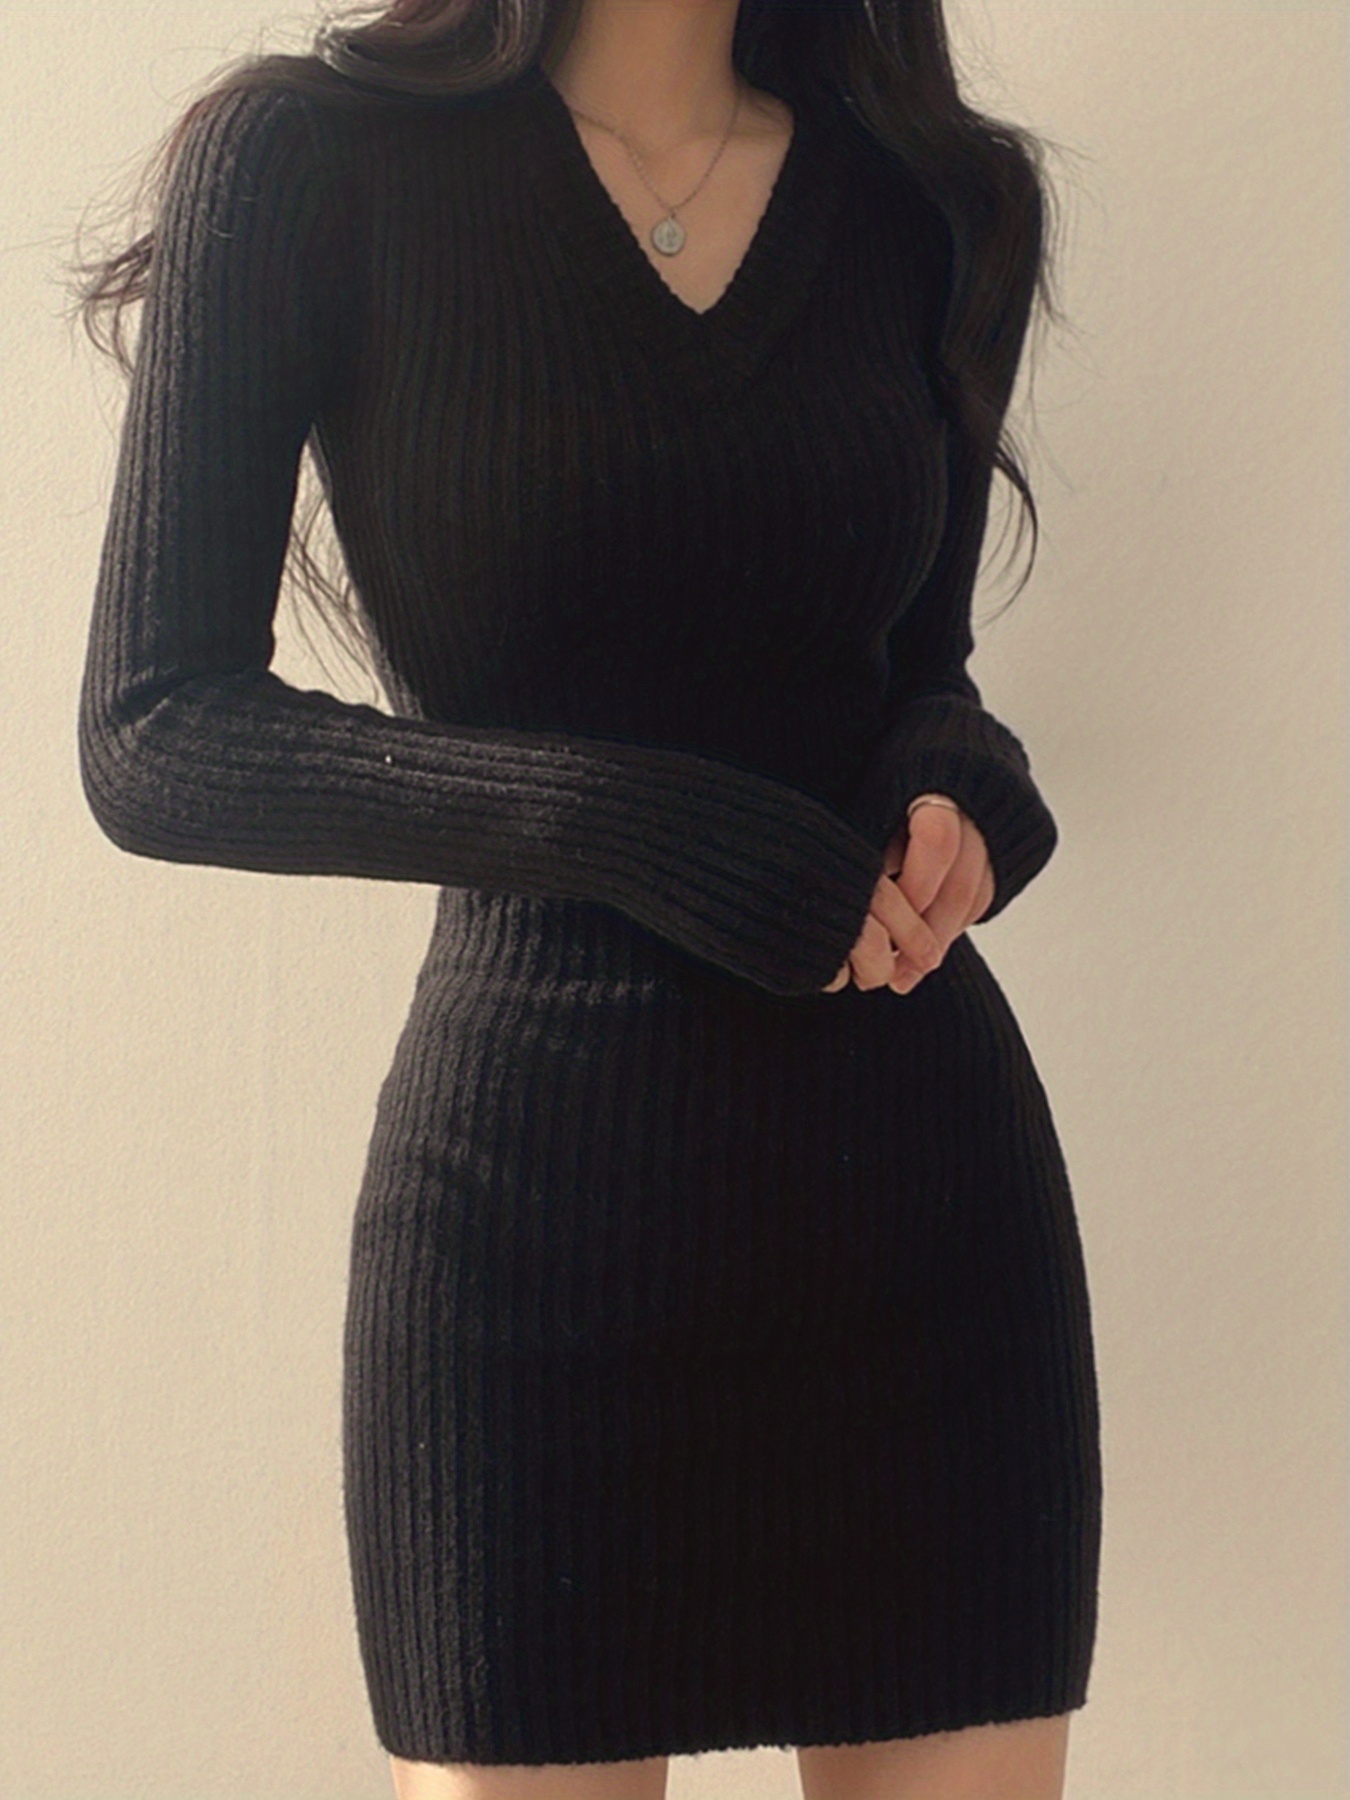 solid knit sweater dress elegant v neck long sleeve bodycon dress for fall winter womens clothing details 7